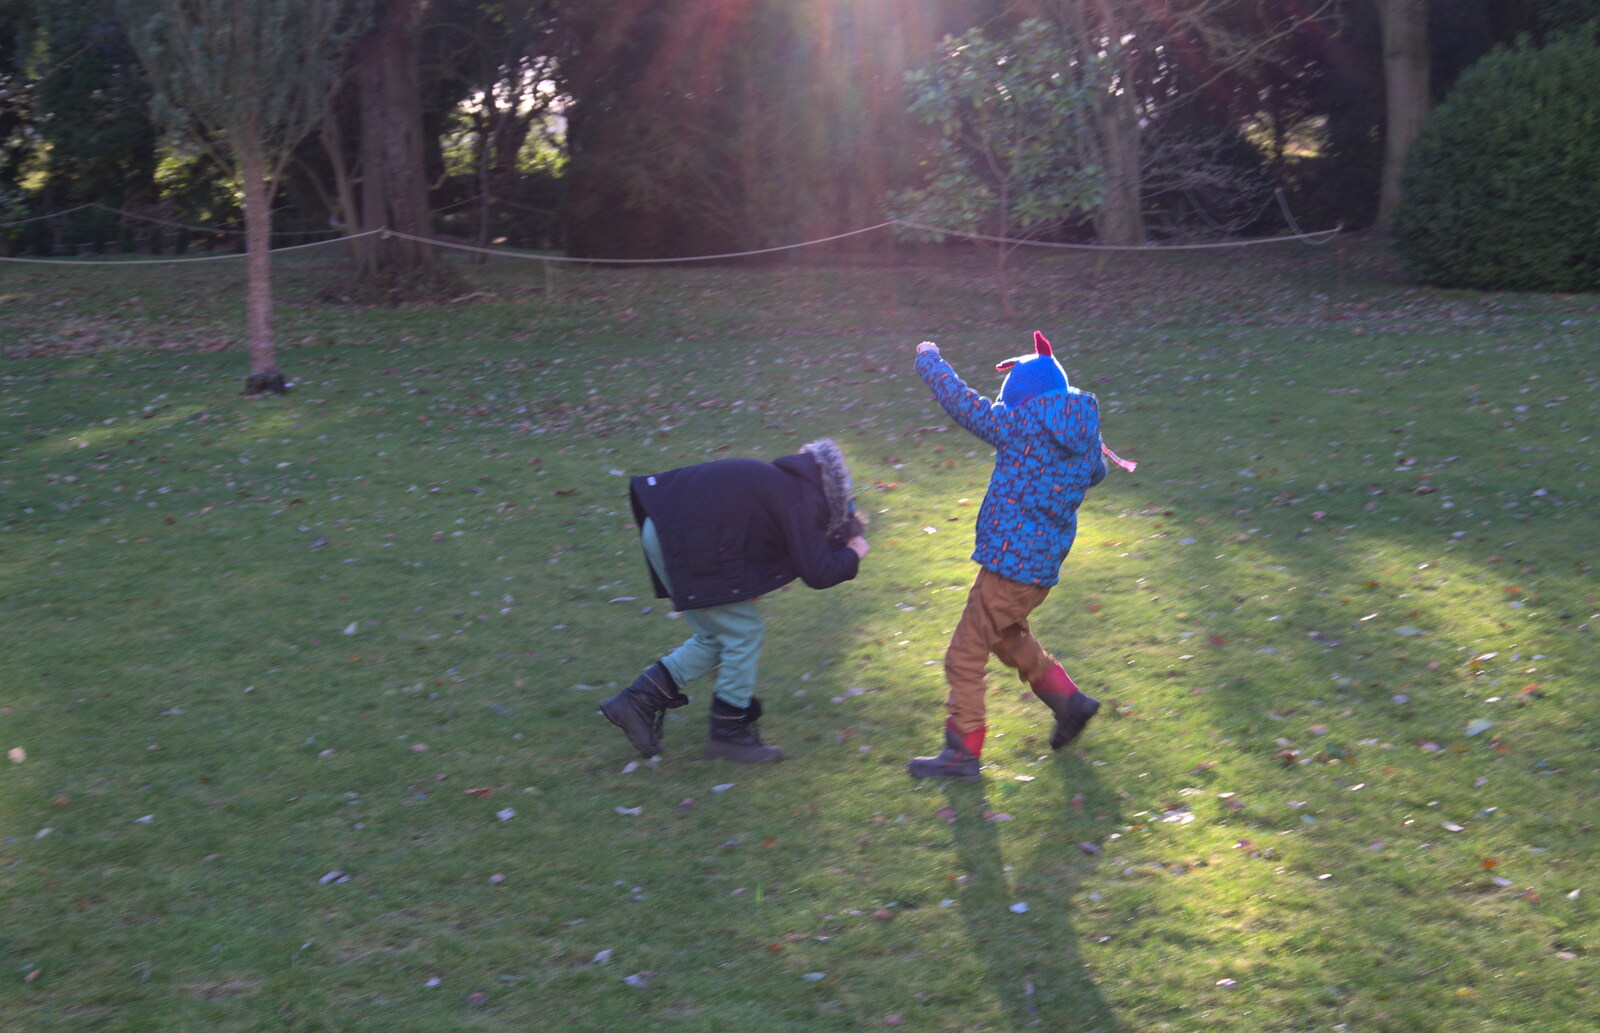 The boys do pretend bull-fighting from Life Below Stairs, Ickworth House, Horringer, Suffolk - 28th January 2018